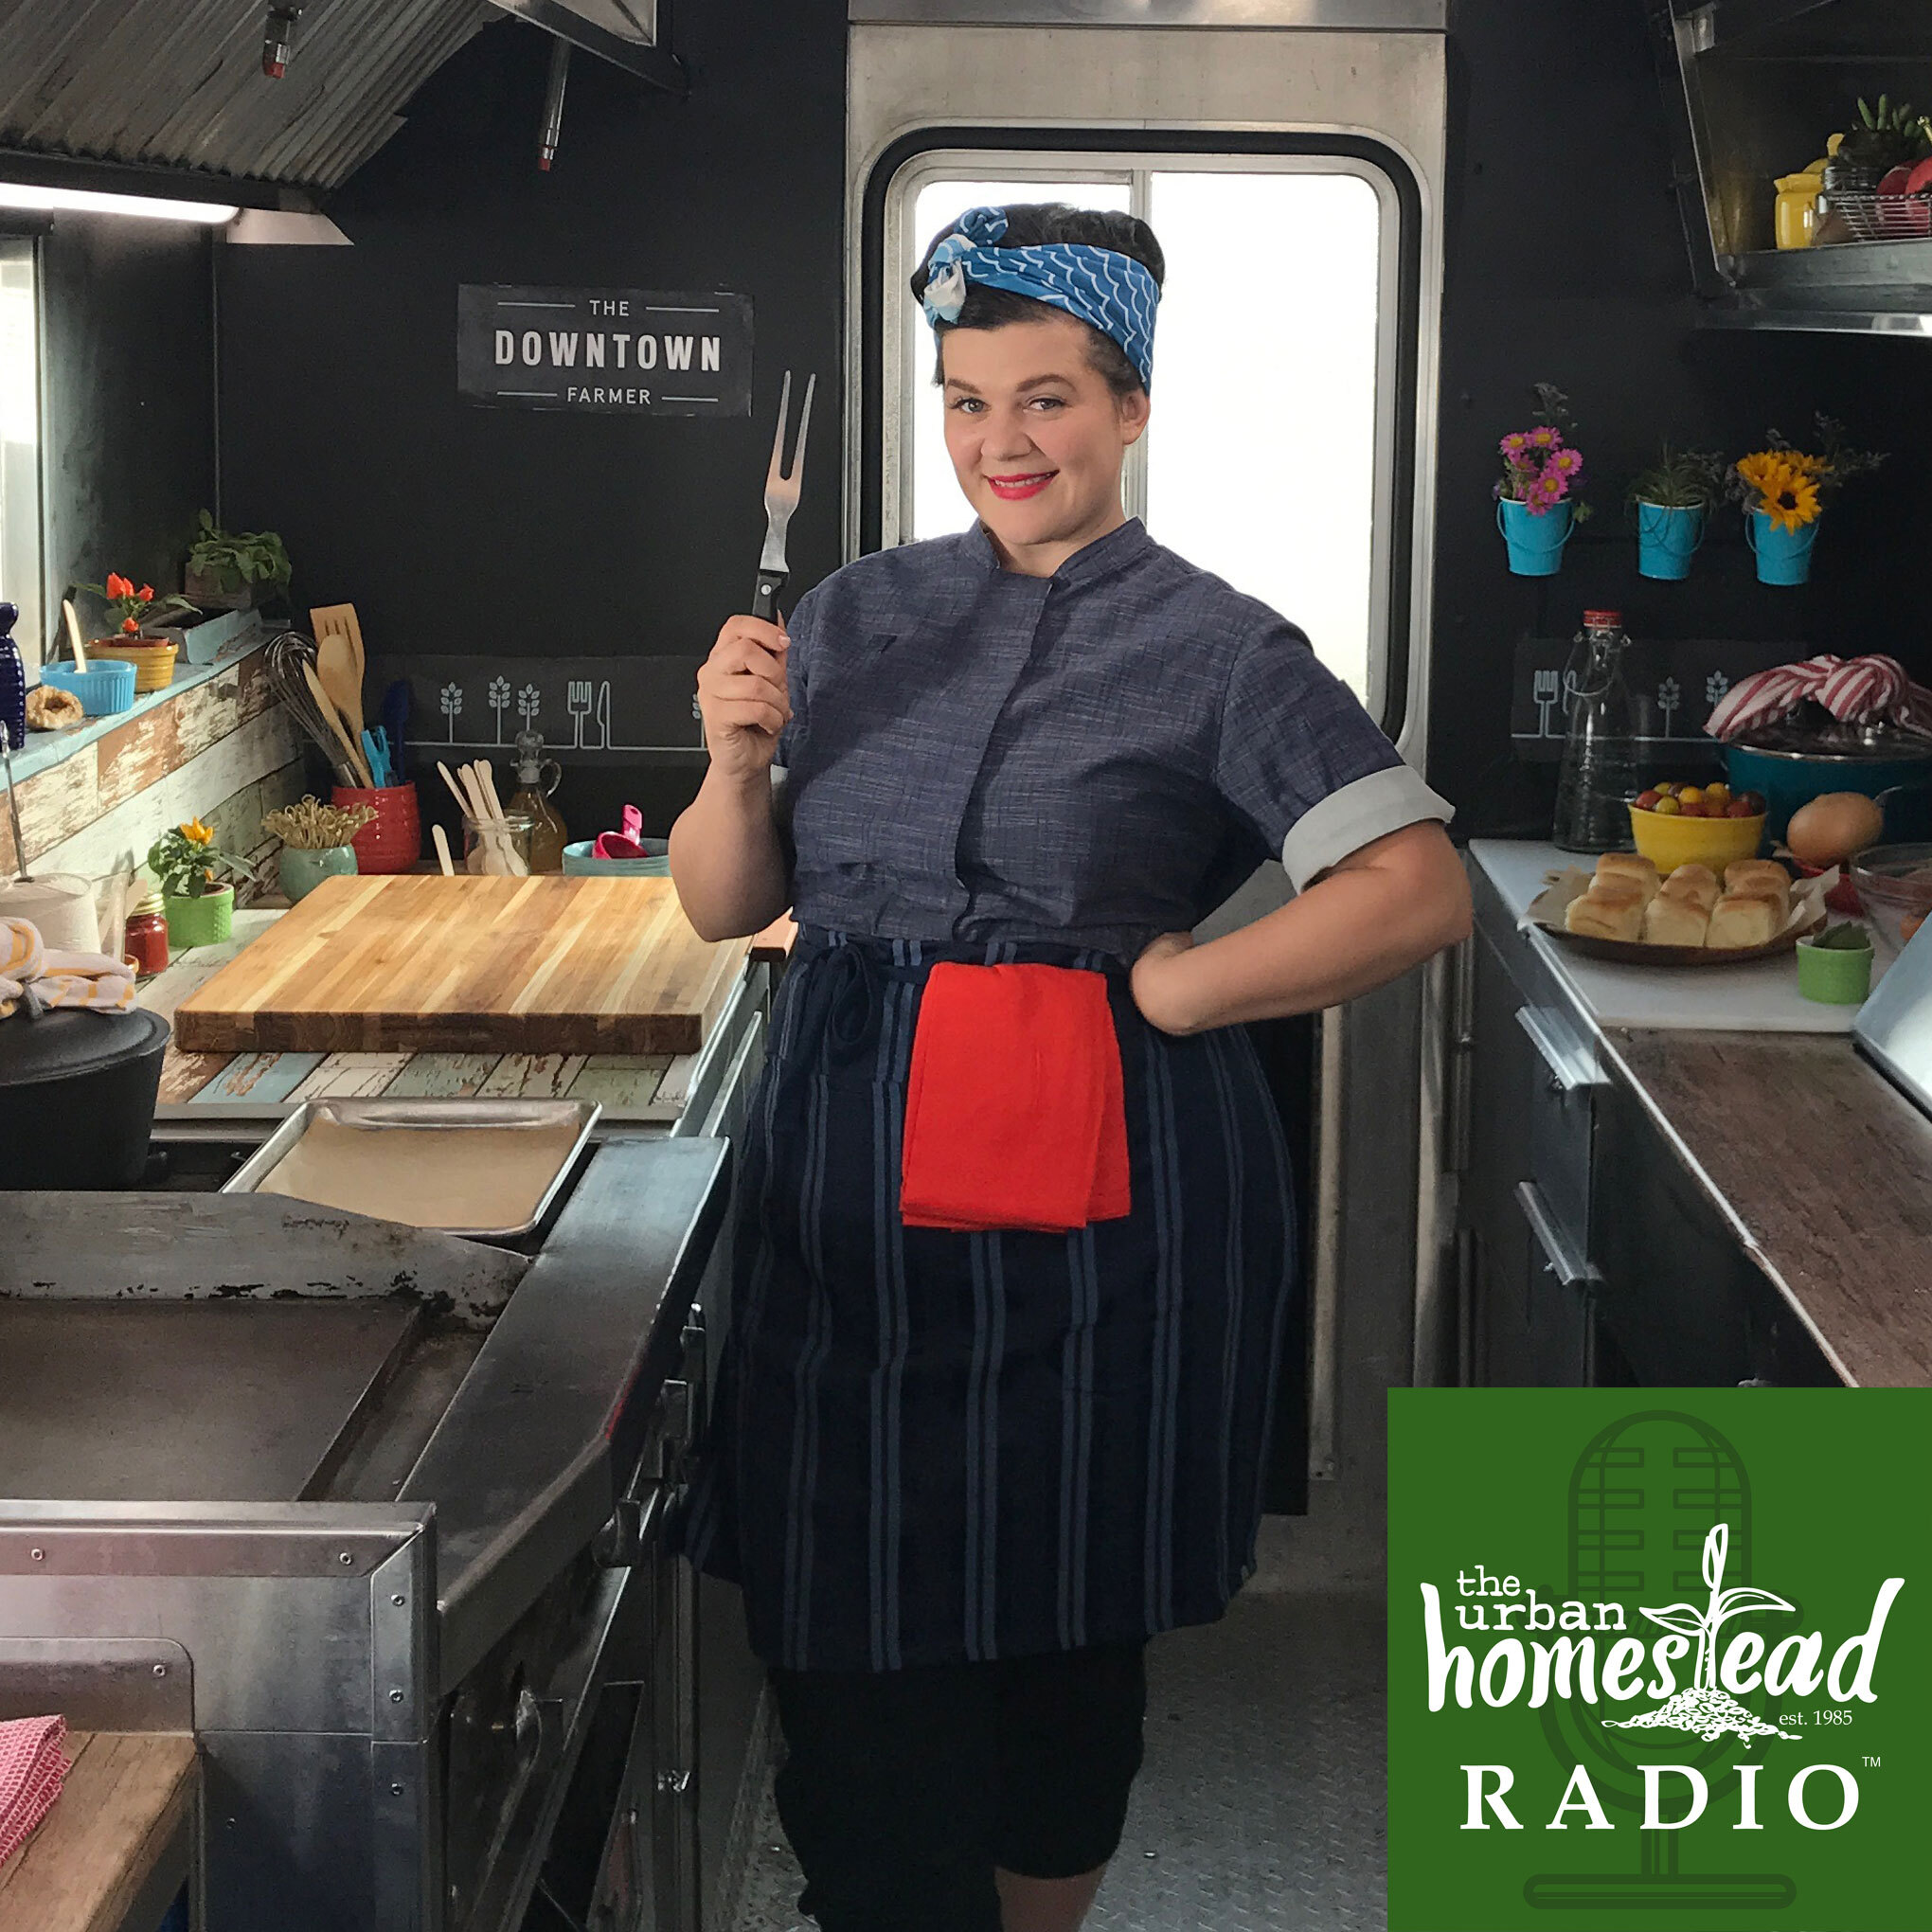 Urban Homestead Radio Episode 45: Chef Loreal Gavin from Country Music Television